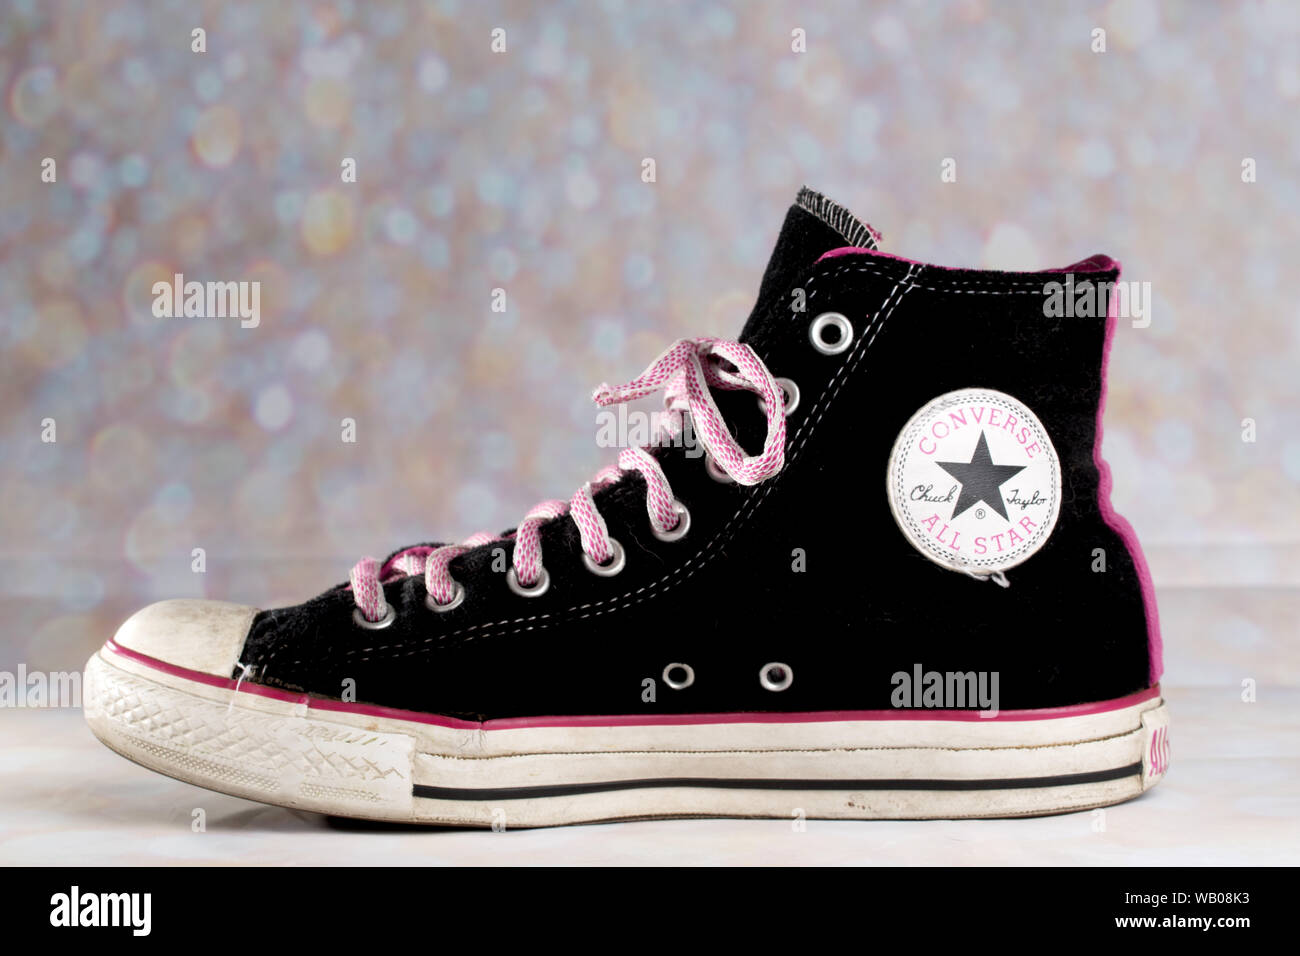 Pink and Black Converse Sneaker worn against a blurry background has pink  shoelaces Stock Photo - Alamy